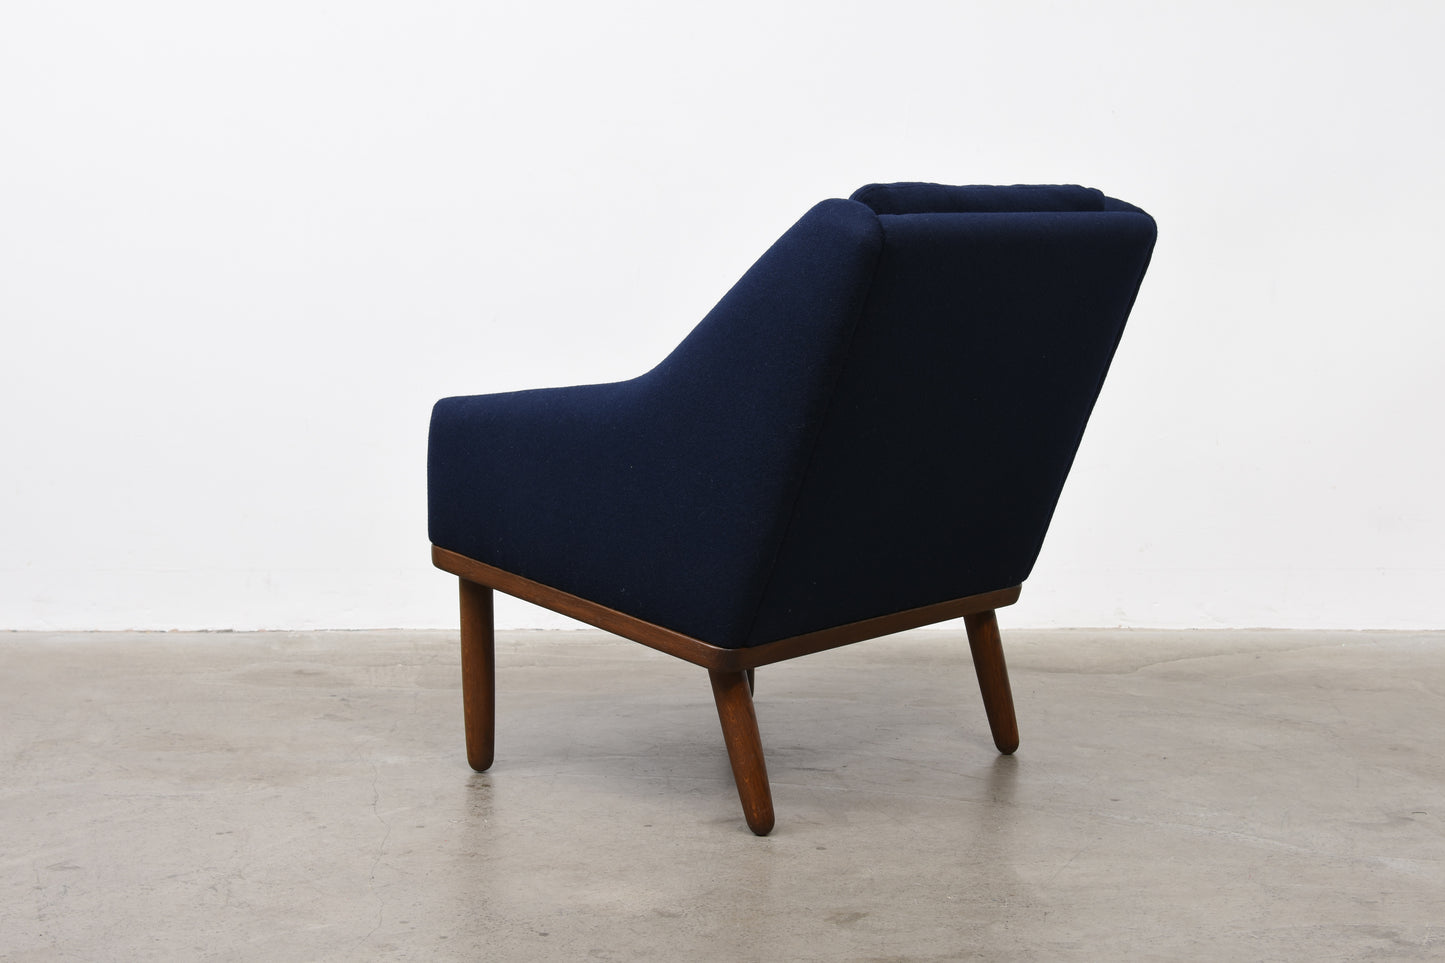 Felt wool lounger by Poul Volther